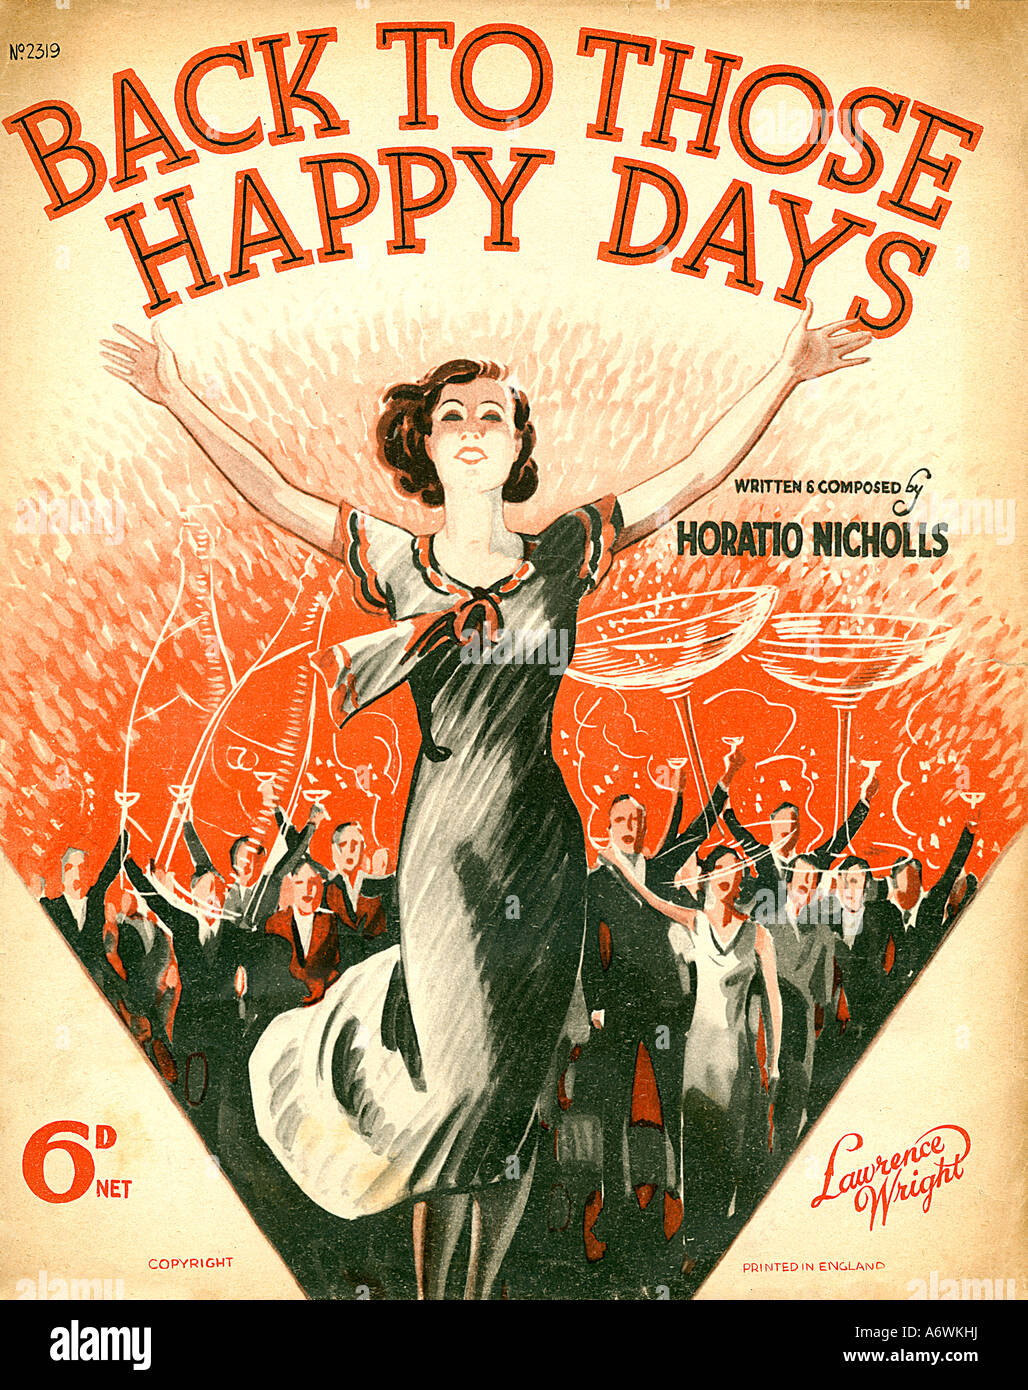 Back To Those Happy Days 1935 song sheet cover for Horatio Nicholls composition about better times returned Stock Photo